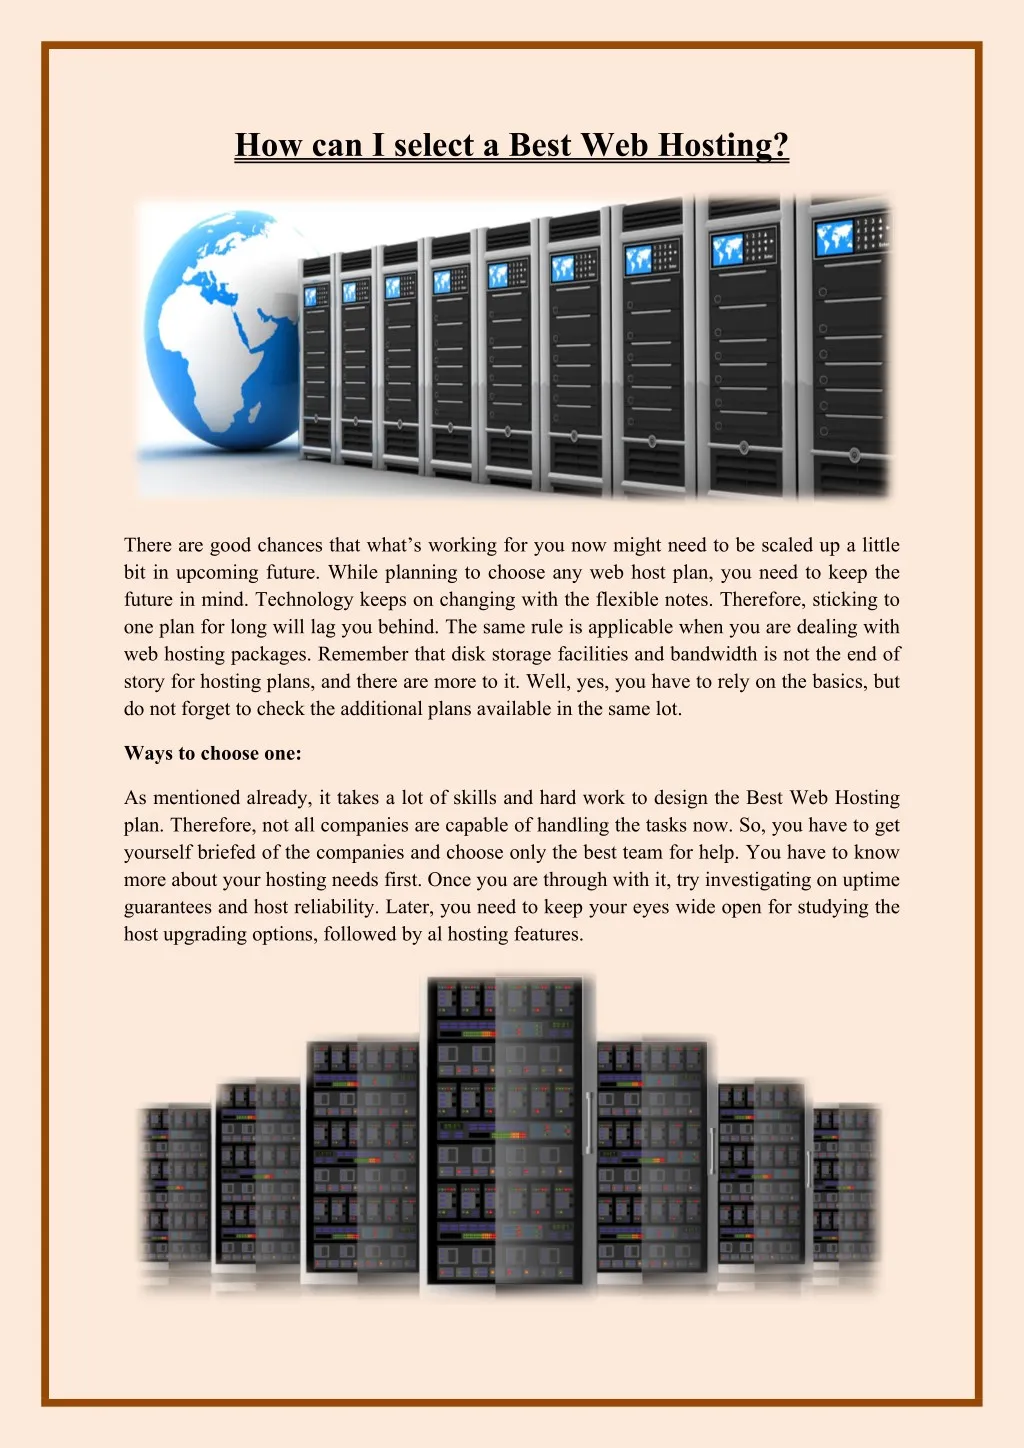 how can i select a best web hosting